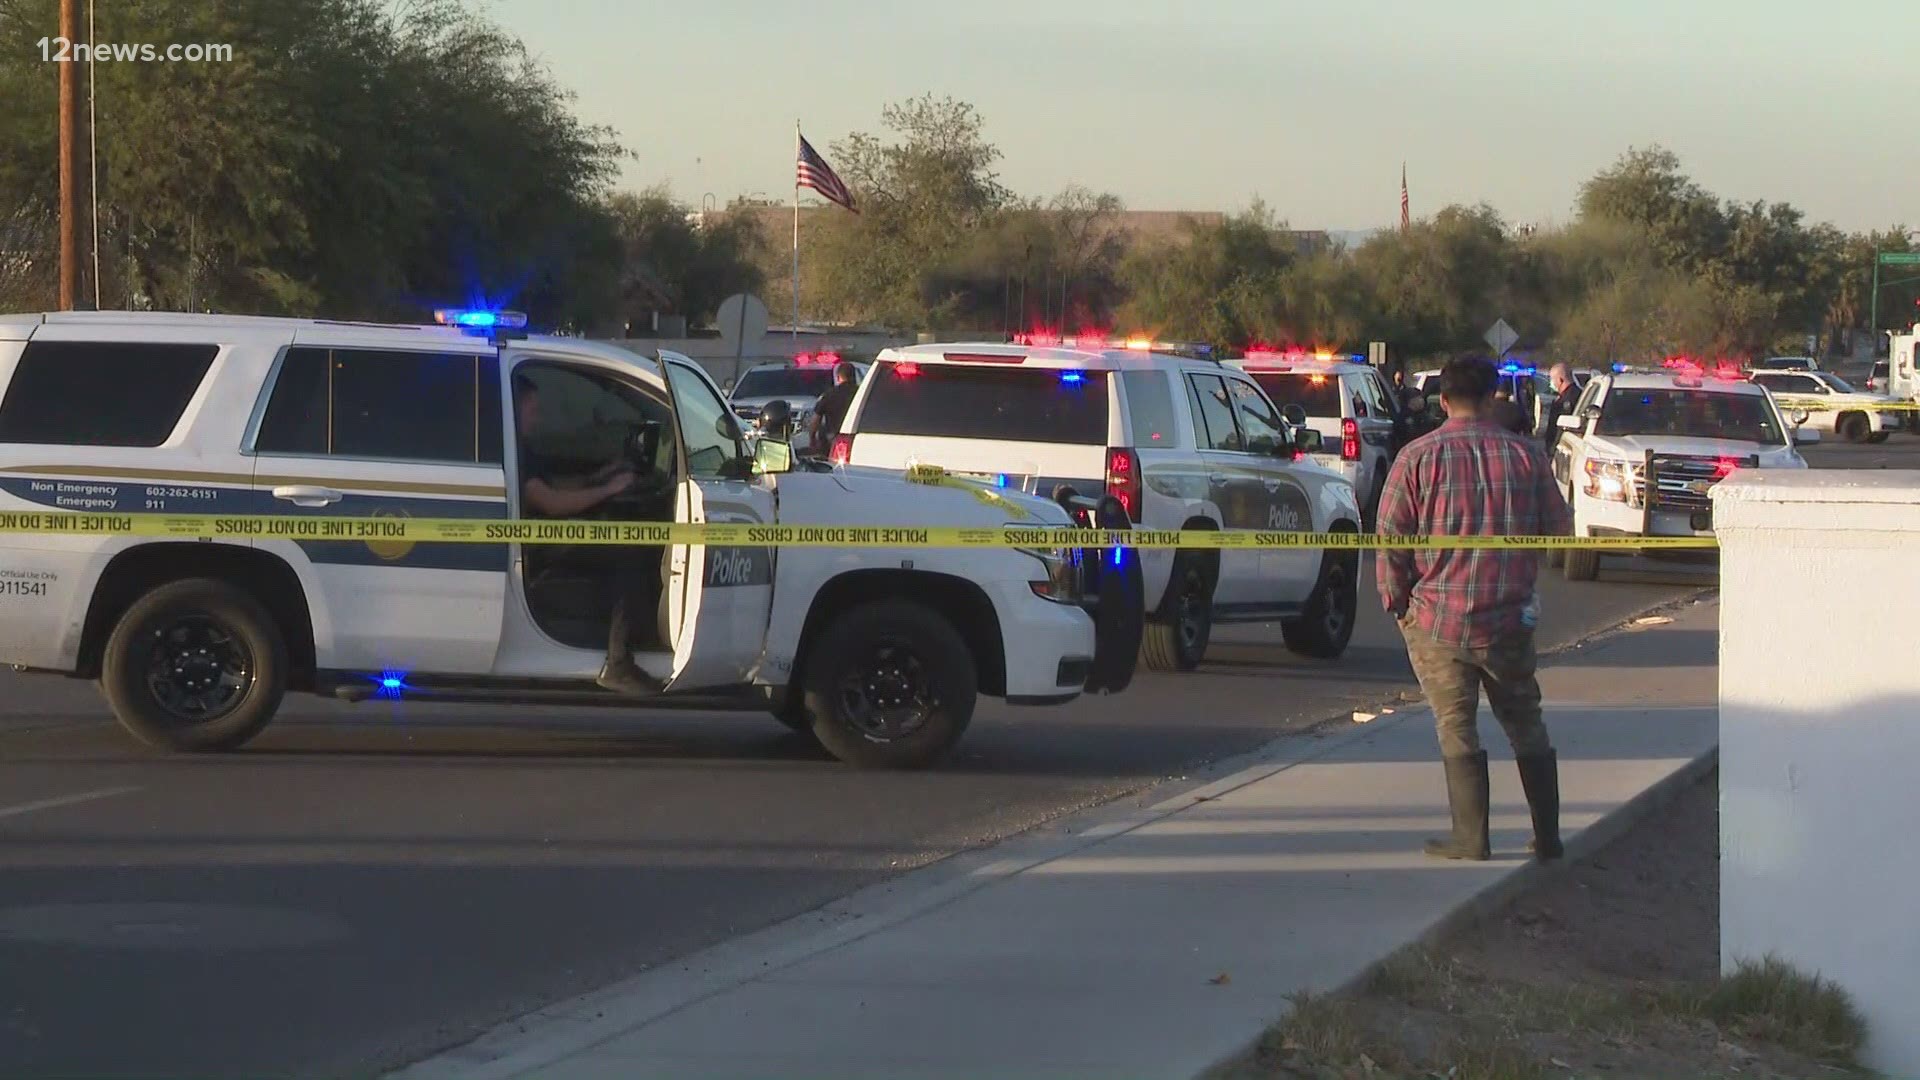 A man accused of vandalizing cars is now in critical condition after a police shooting in Phoenix that happened Tuesday afternoon.